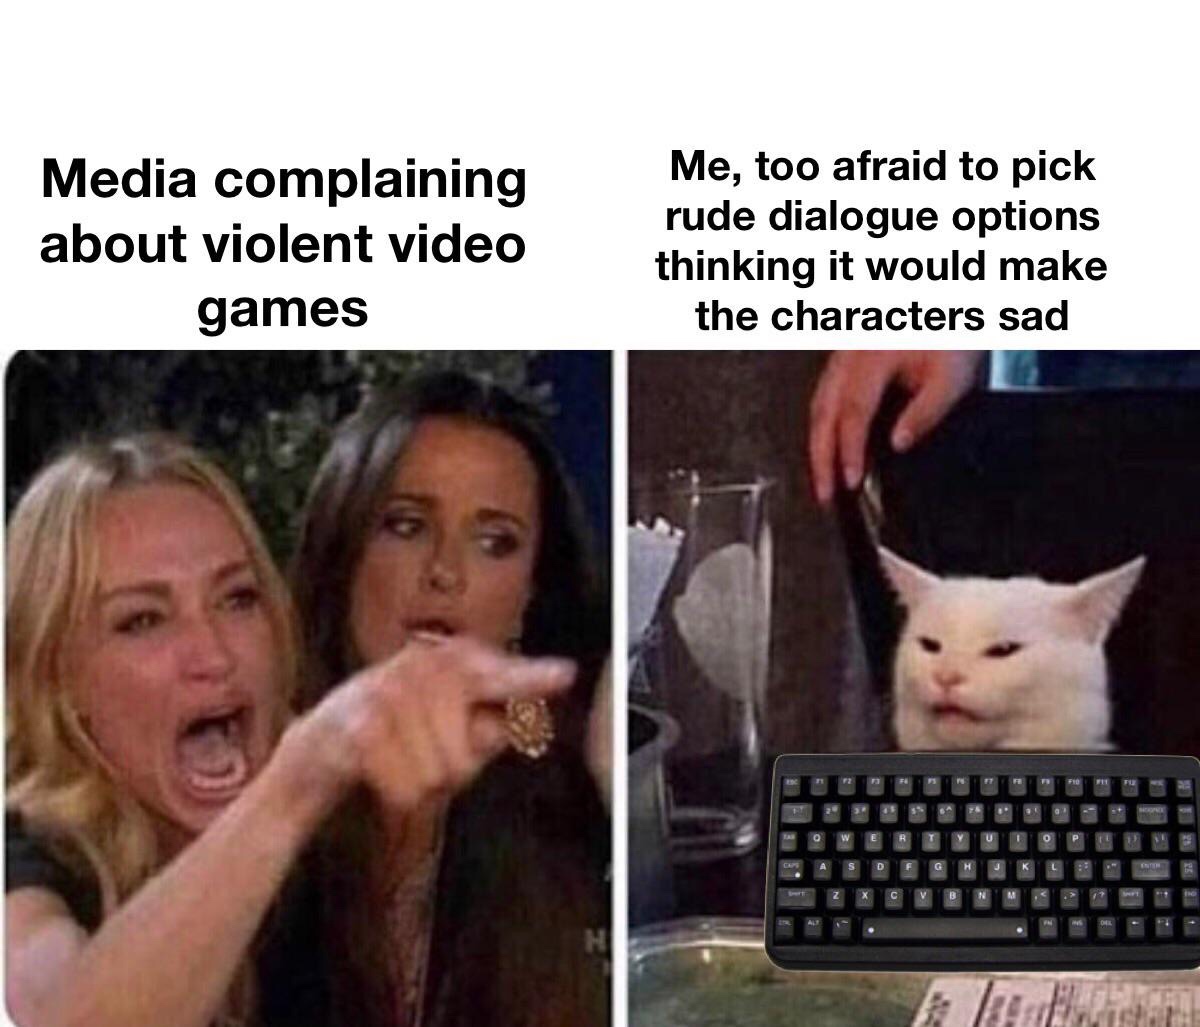 violent video games meme - Media complaining about violent video games Me, too afraid to pick rude dialogue options thinking it would make the characters sad e l id